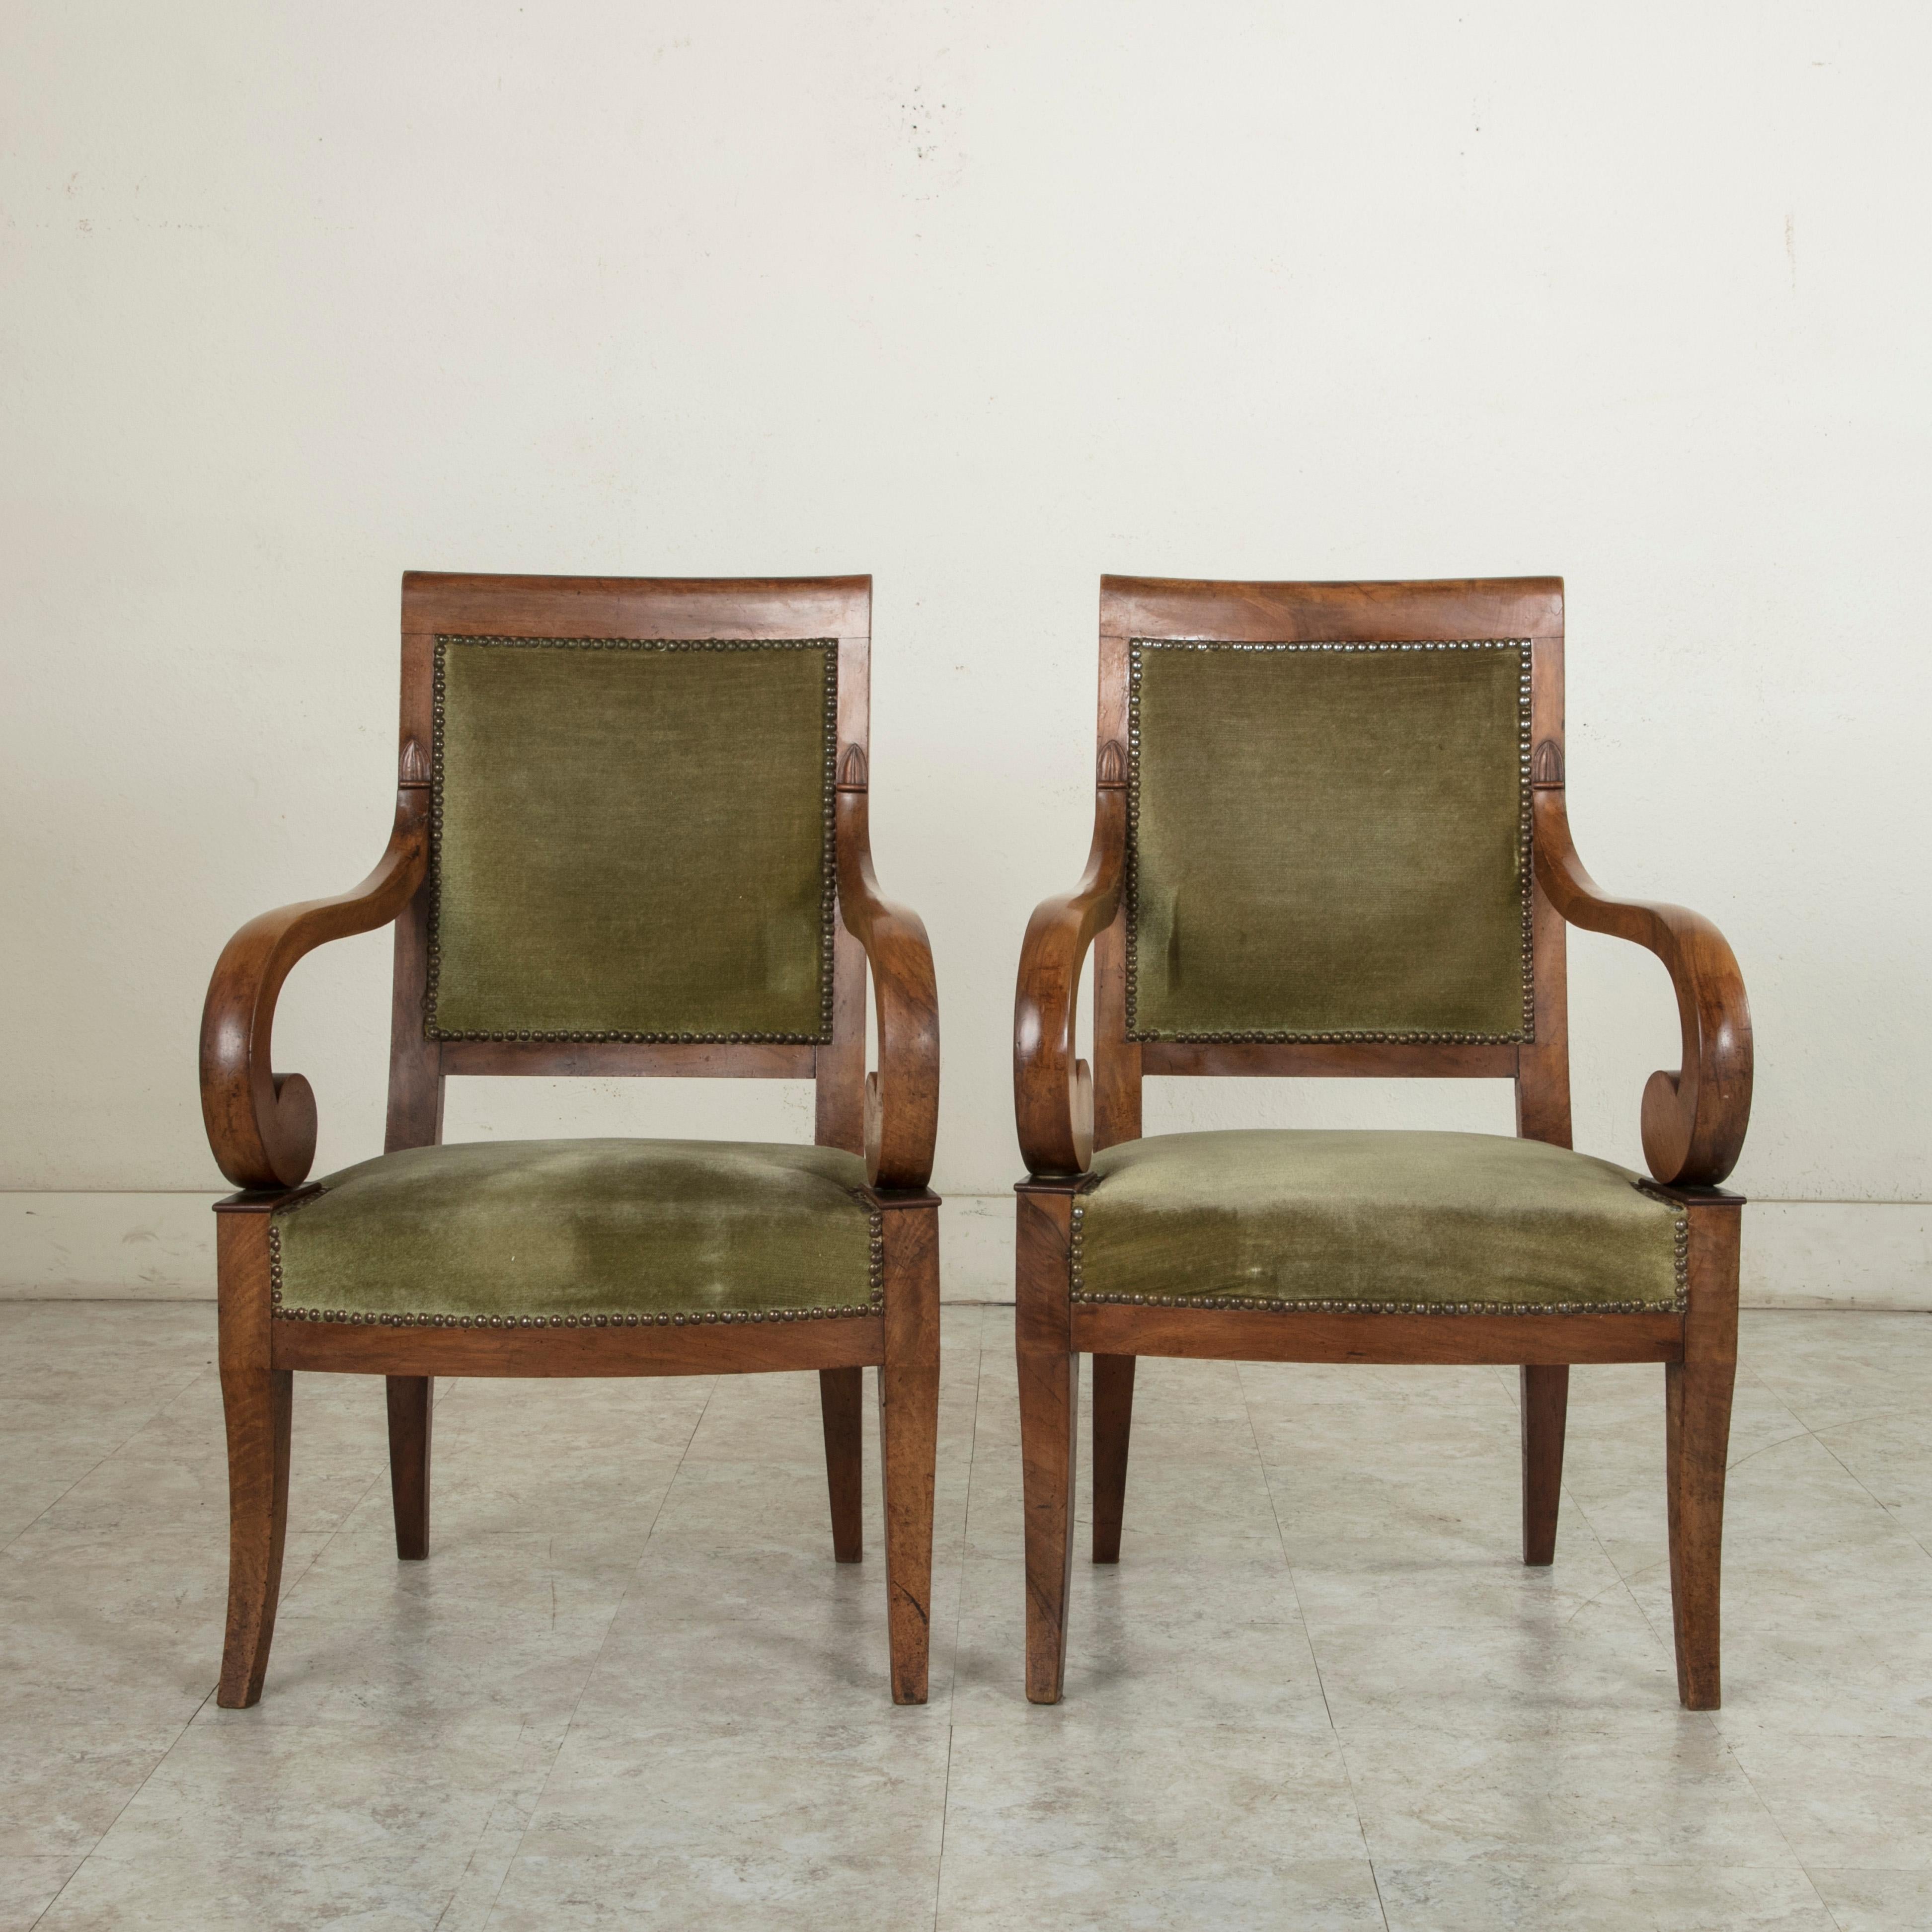 This pair of French Restauration period walnut armchairs from the early 19th century features scrolling arms and gently curved legs. The legs are flared 